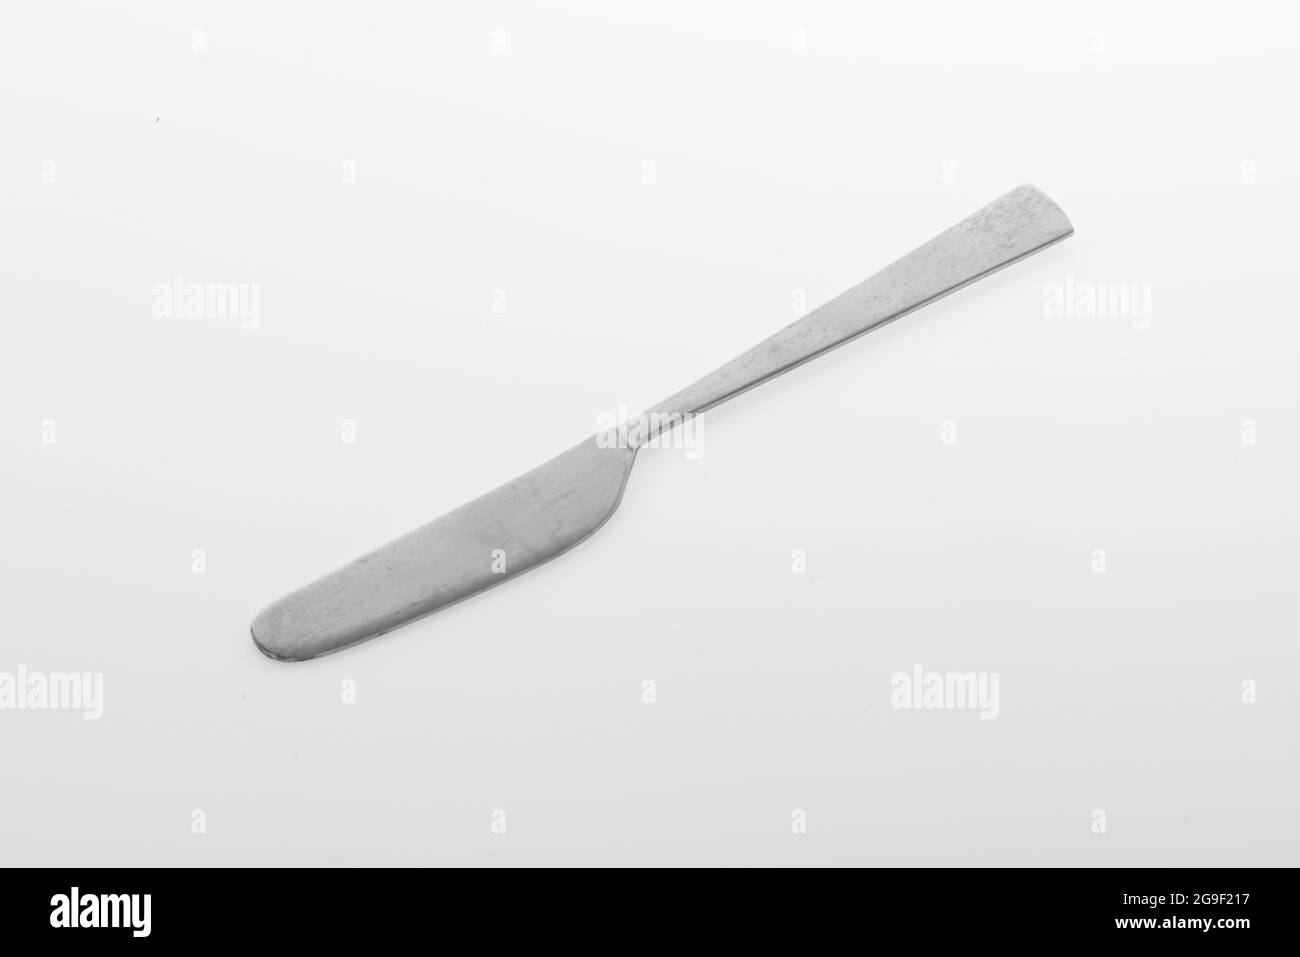 Butter knife Black and White Stock Photos & Images - Alamy